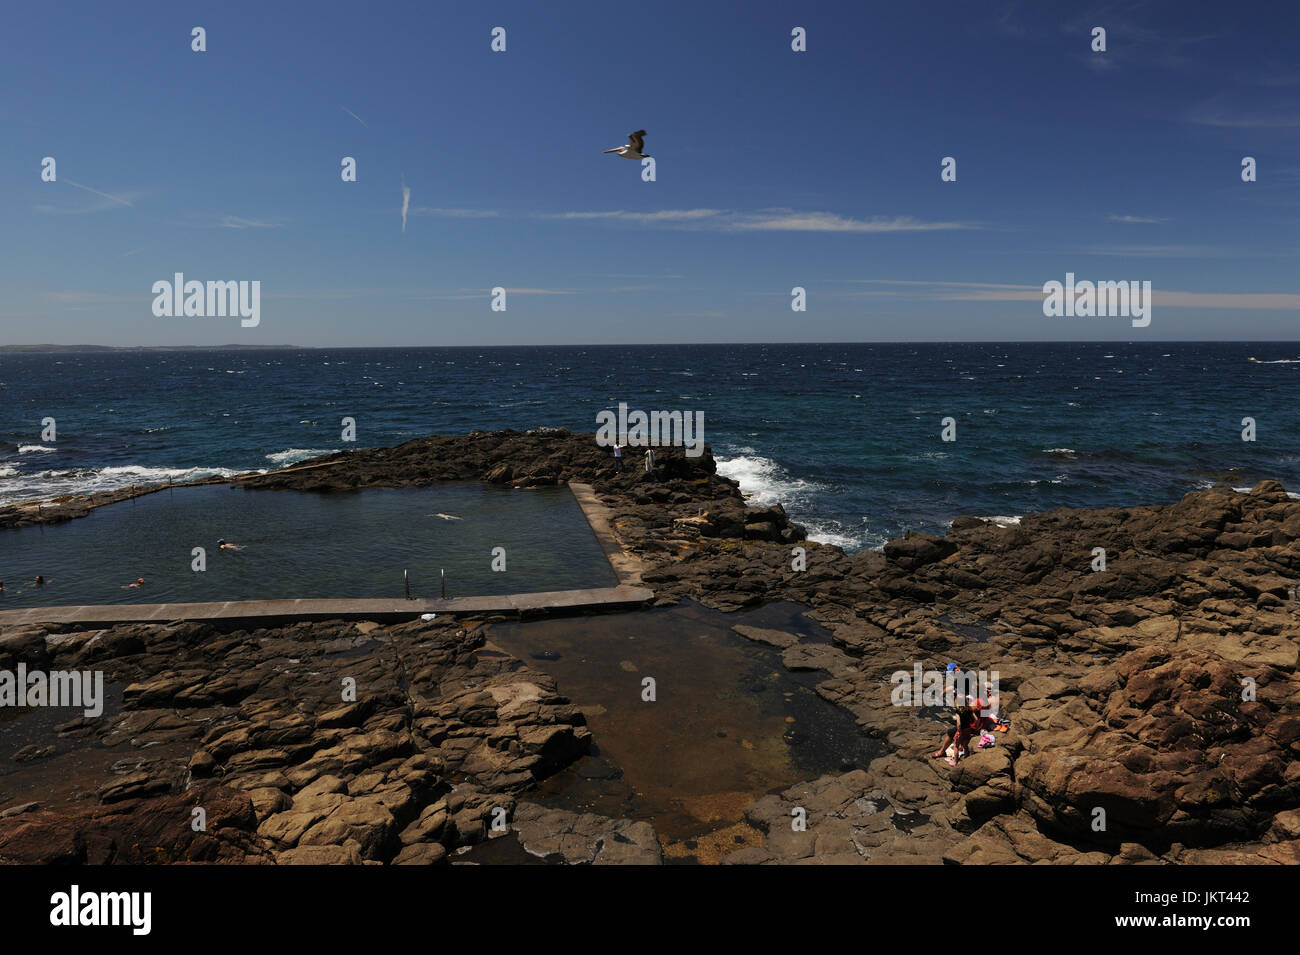 Rock pool with people swimming and lazing about. Pelican (Pelecanus) flying through. Kiama. New South Wales. AUSTRALIA Stock Photo